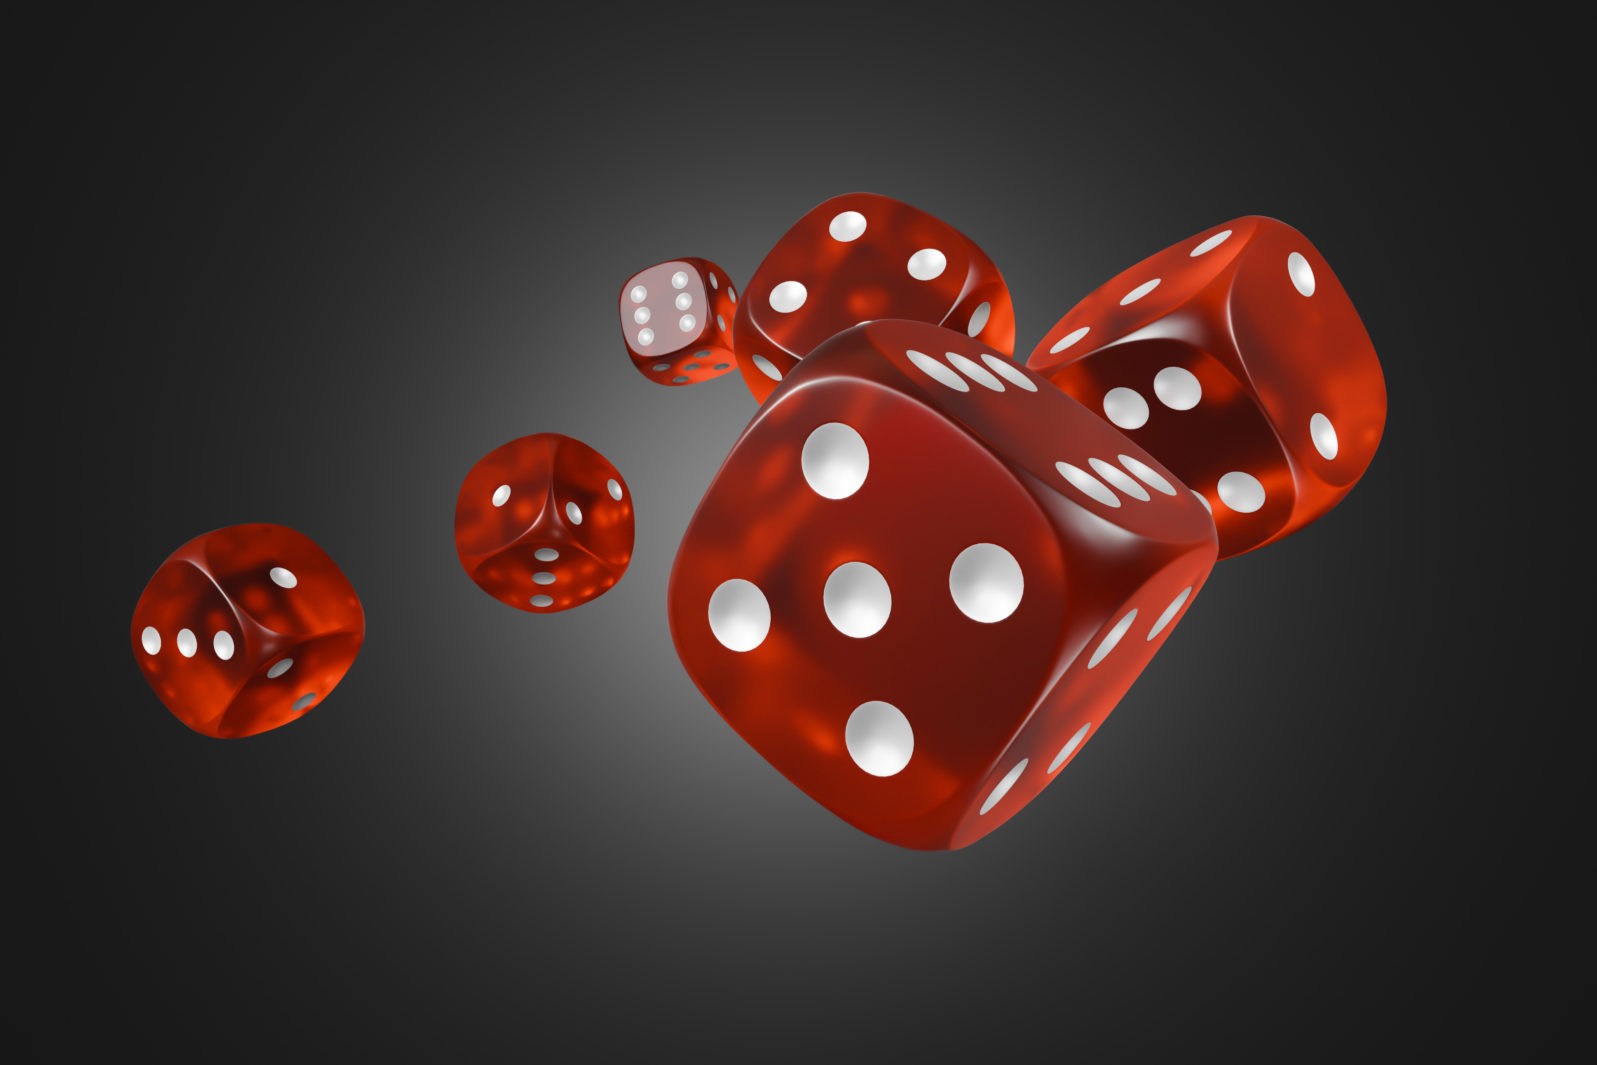 Set of red glass dice isolated on black background. 3d rendering - illustration.